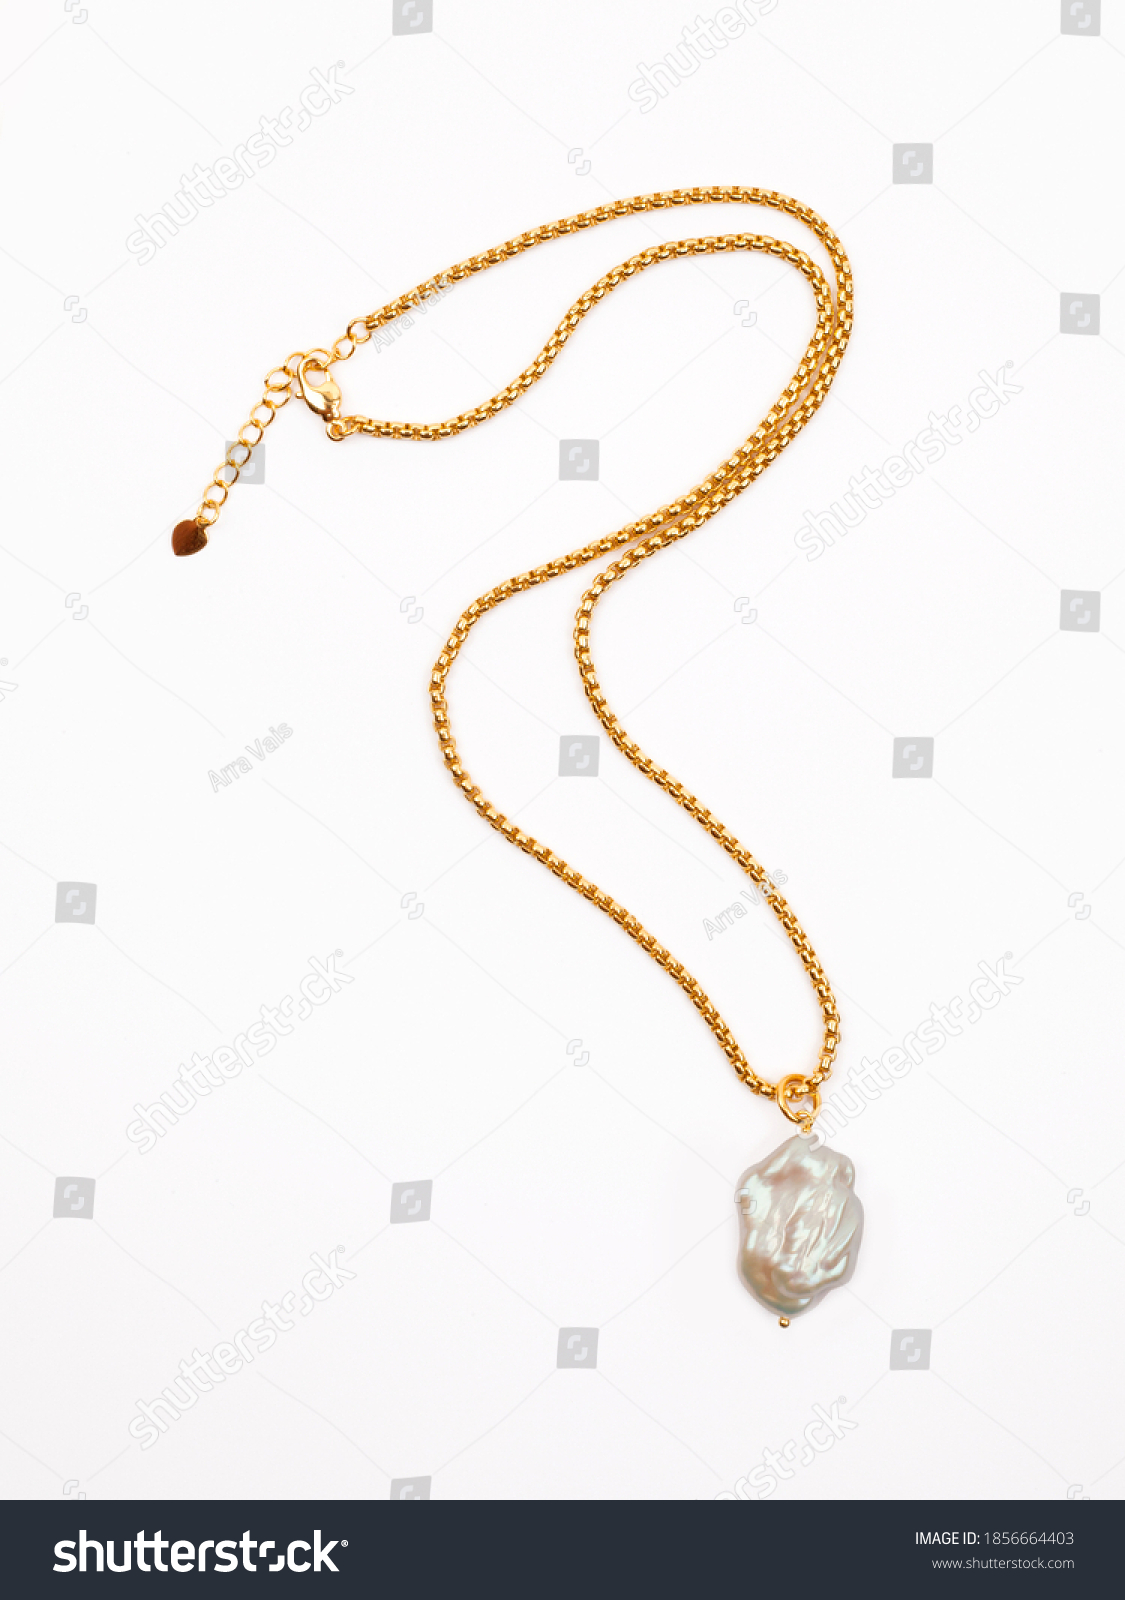 Luxury elegant golden chain with baroque pearl pendant isolated on white background. Close-up shot #1856664403